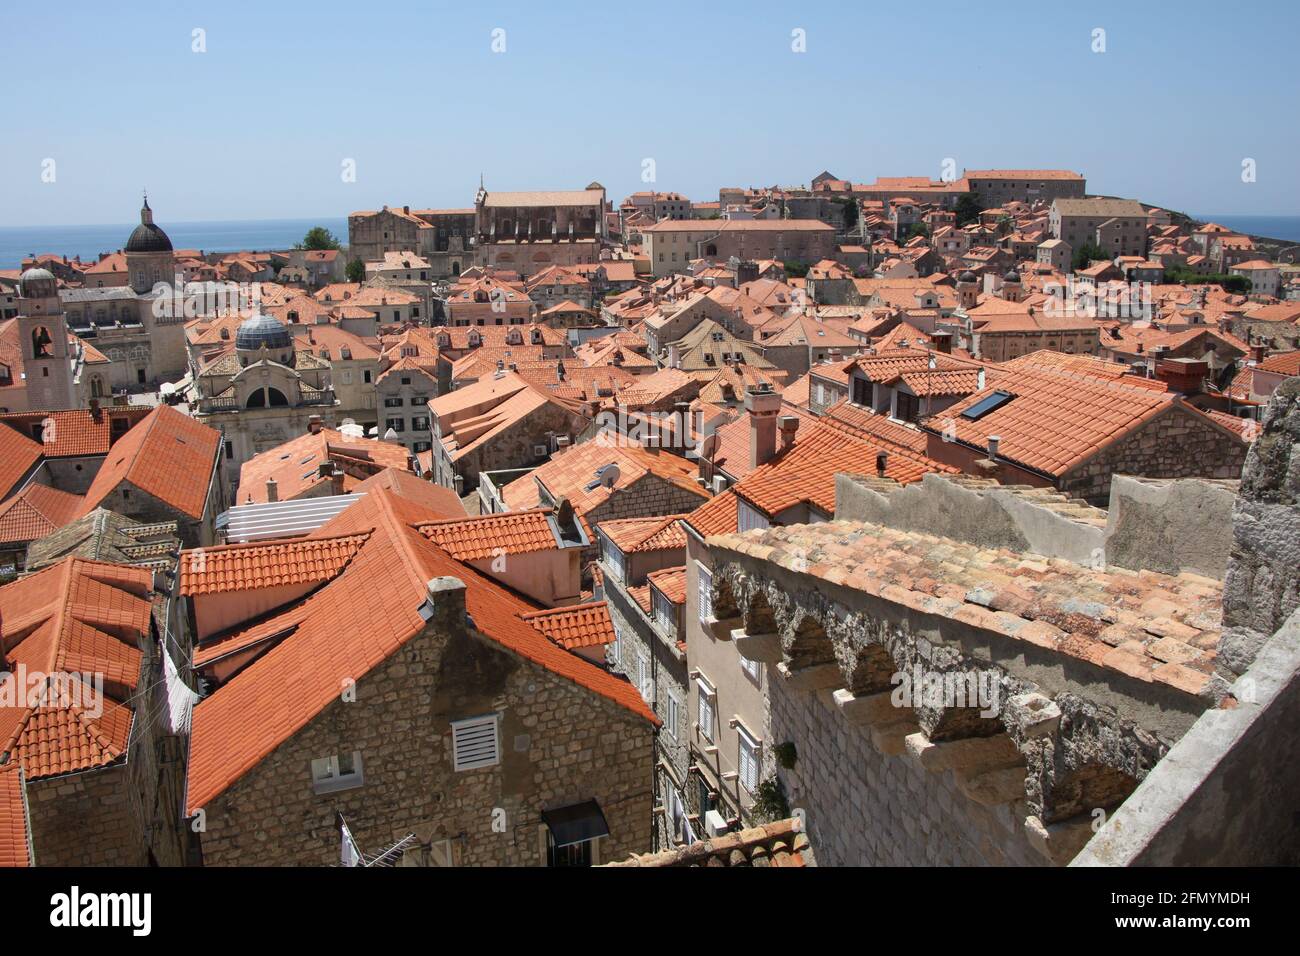 Red rooftop scene of the walled city of Dubrovnic Croatia, with the Adriatic sea in the background Stock Photo